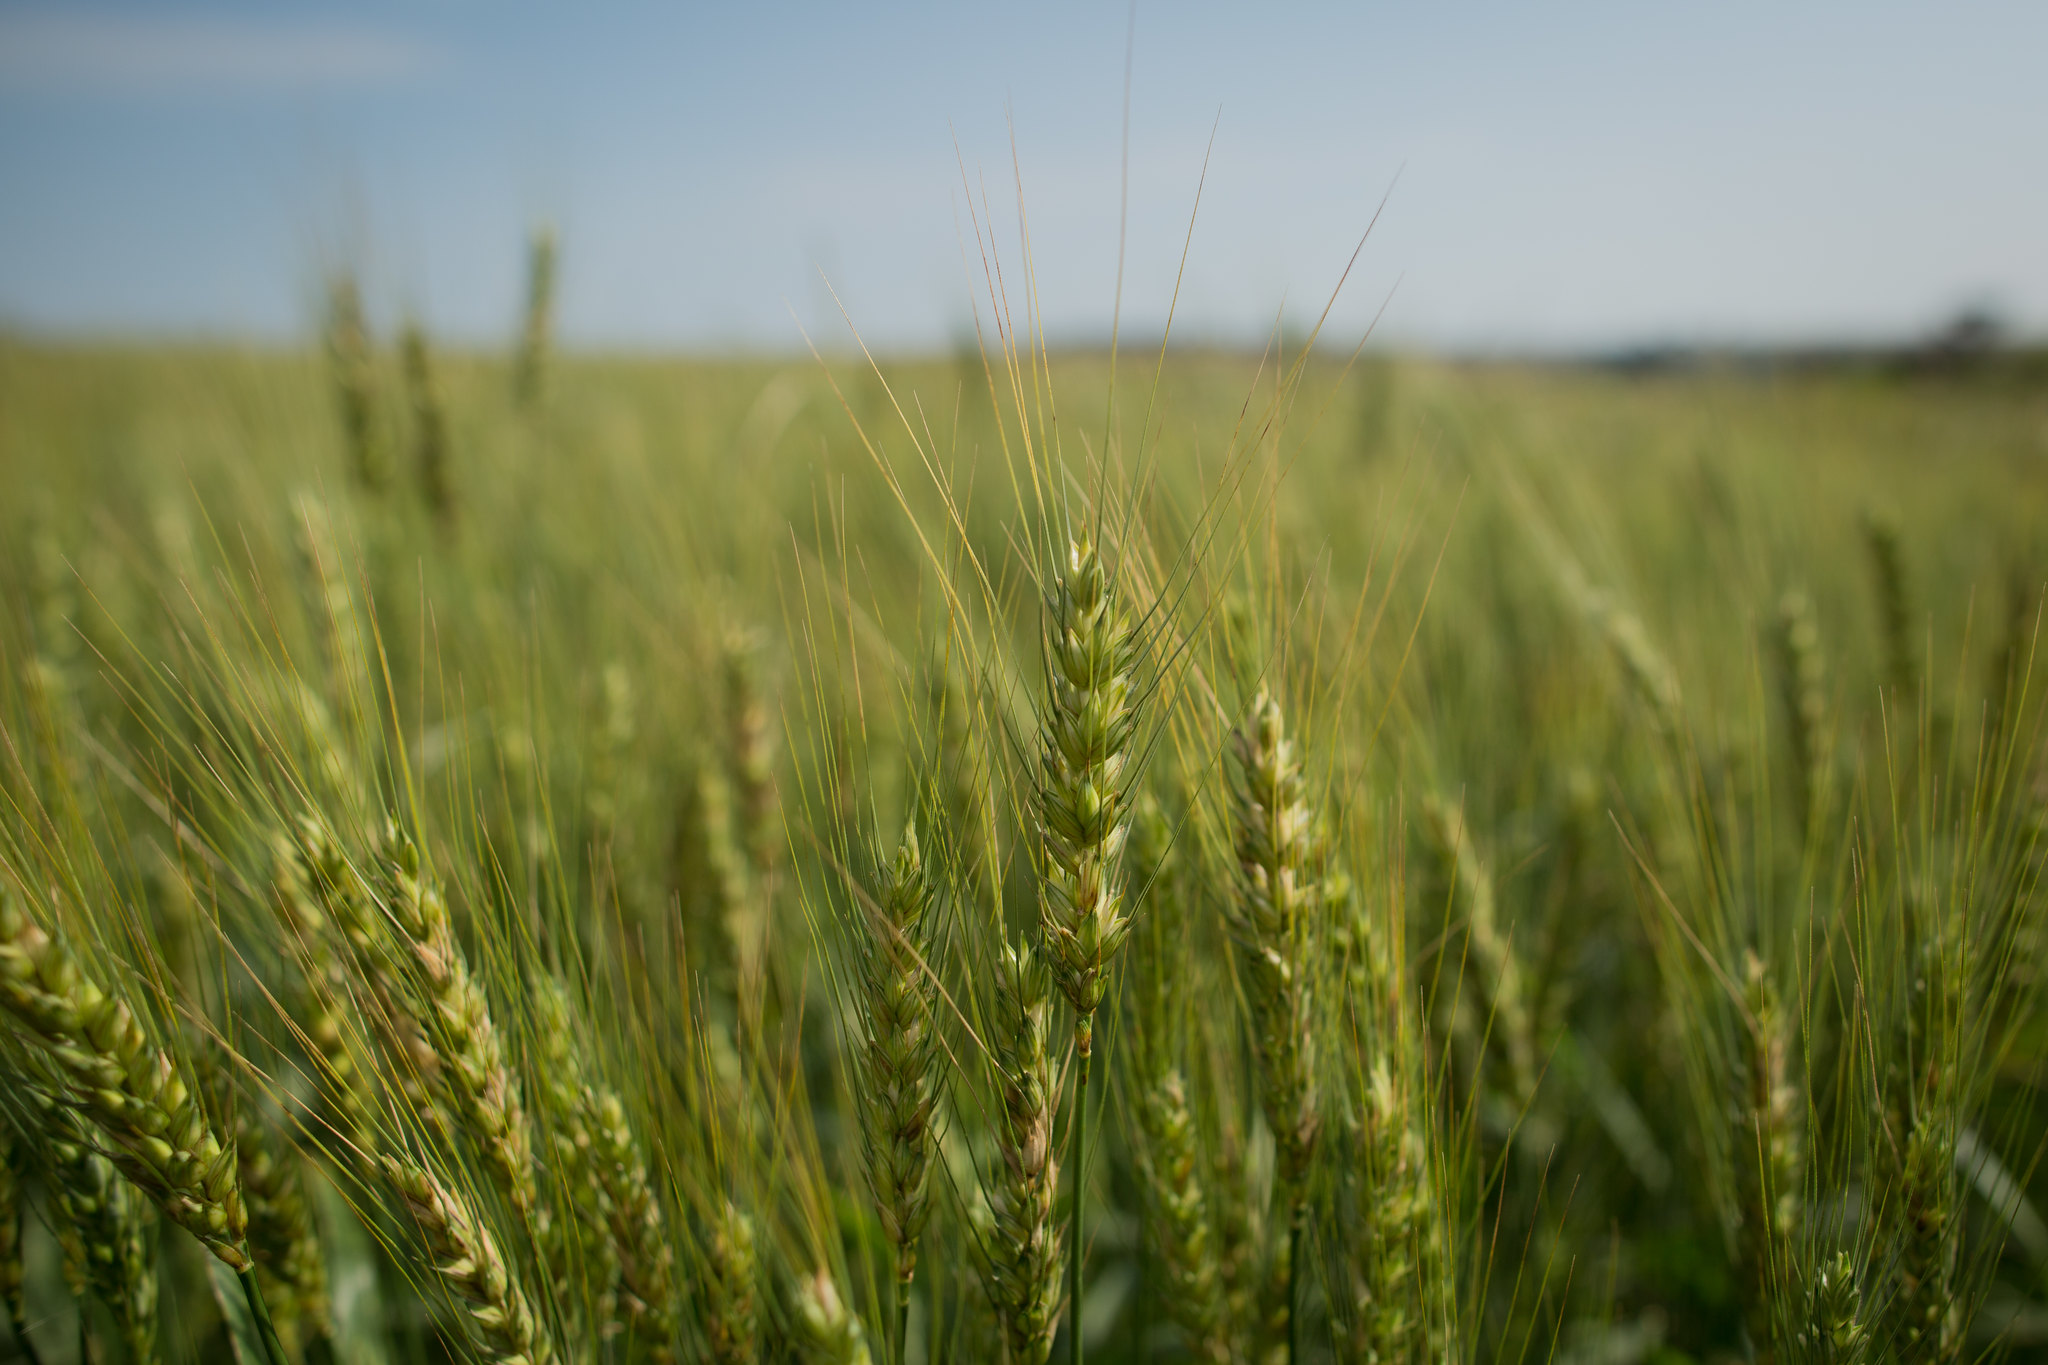 Publication presents the main pests in wheat crops